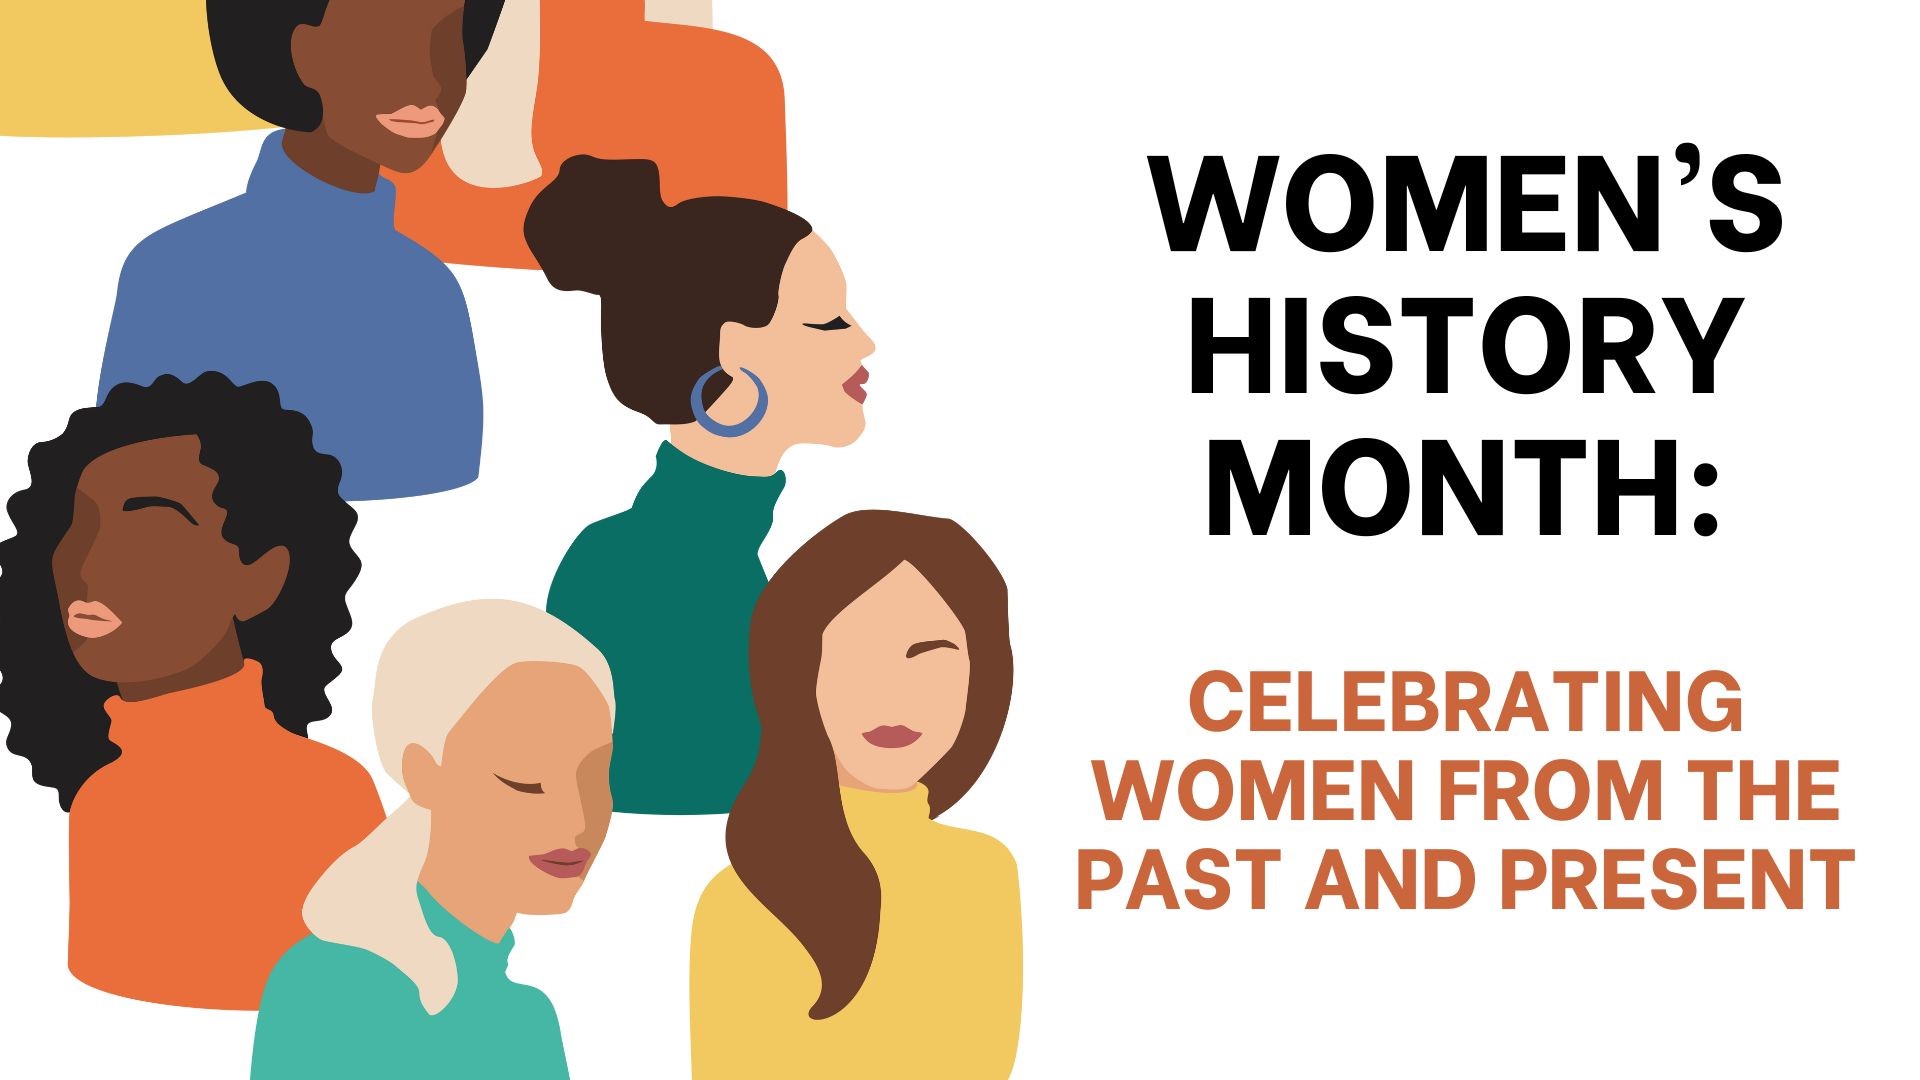 March is Women's History Month, a time to celebrate the contributions and trailblazing work of women. Here are stories honoring past and present women.